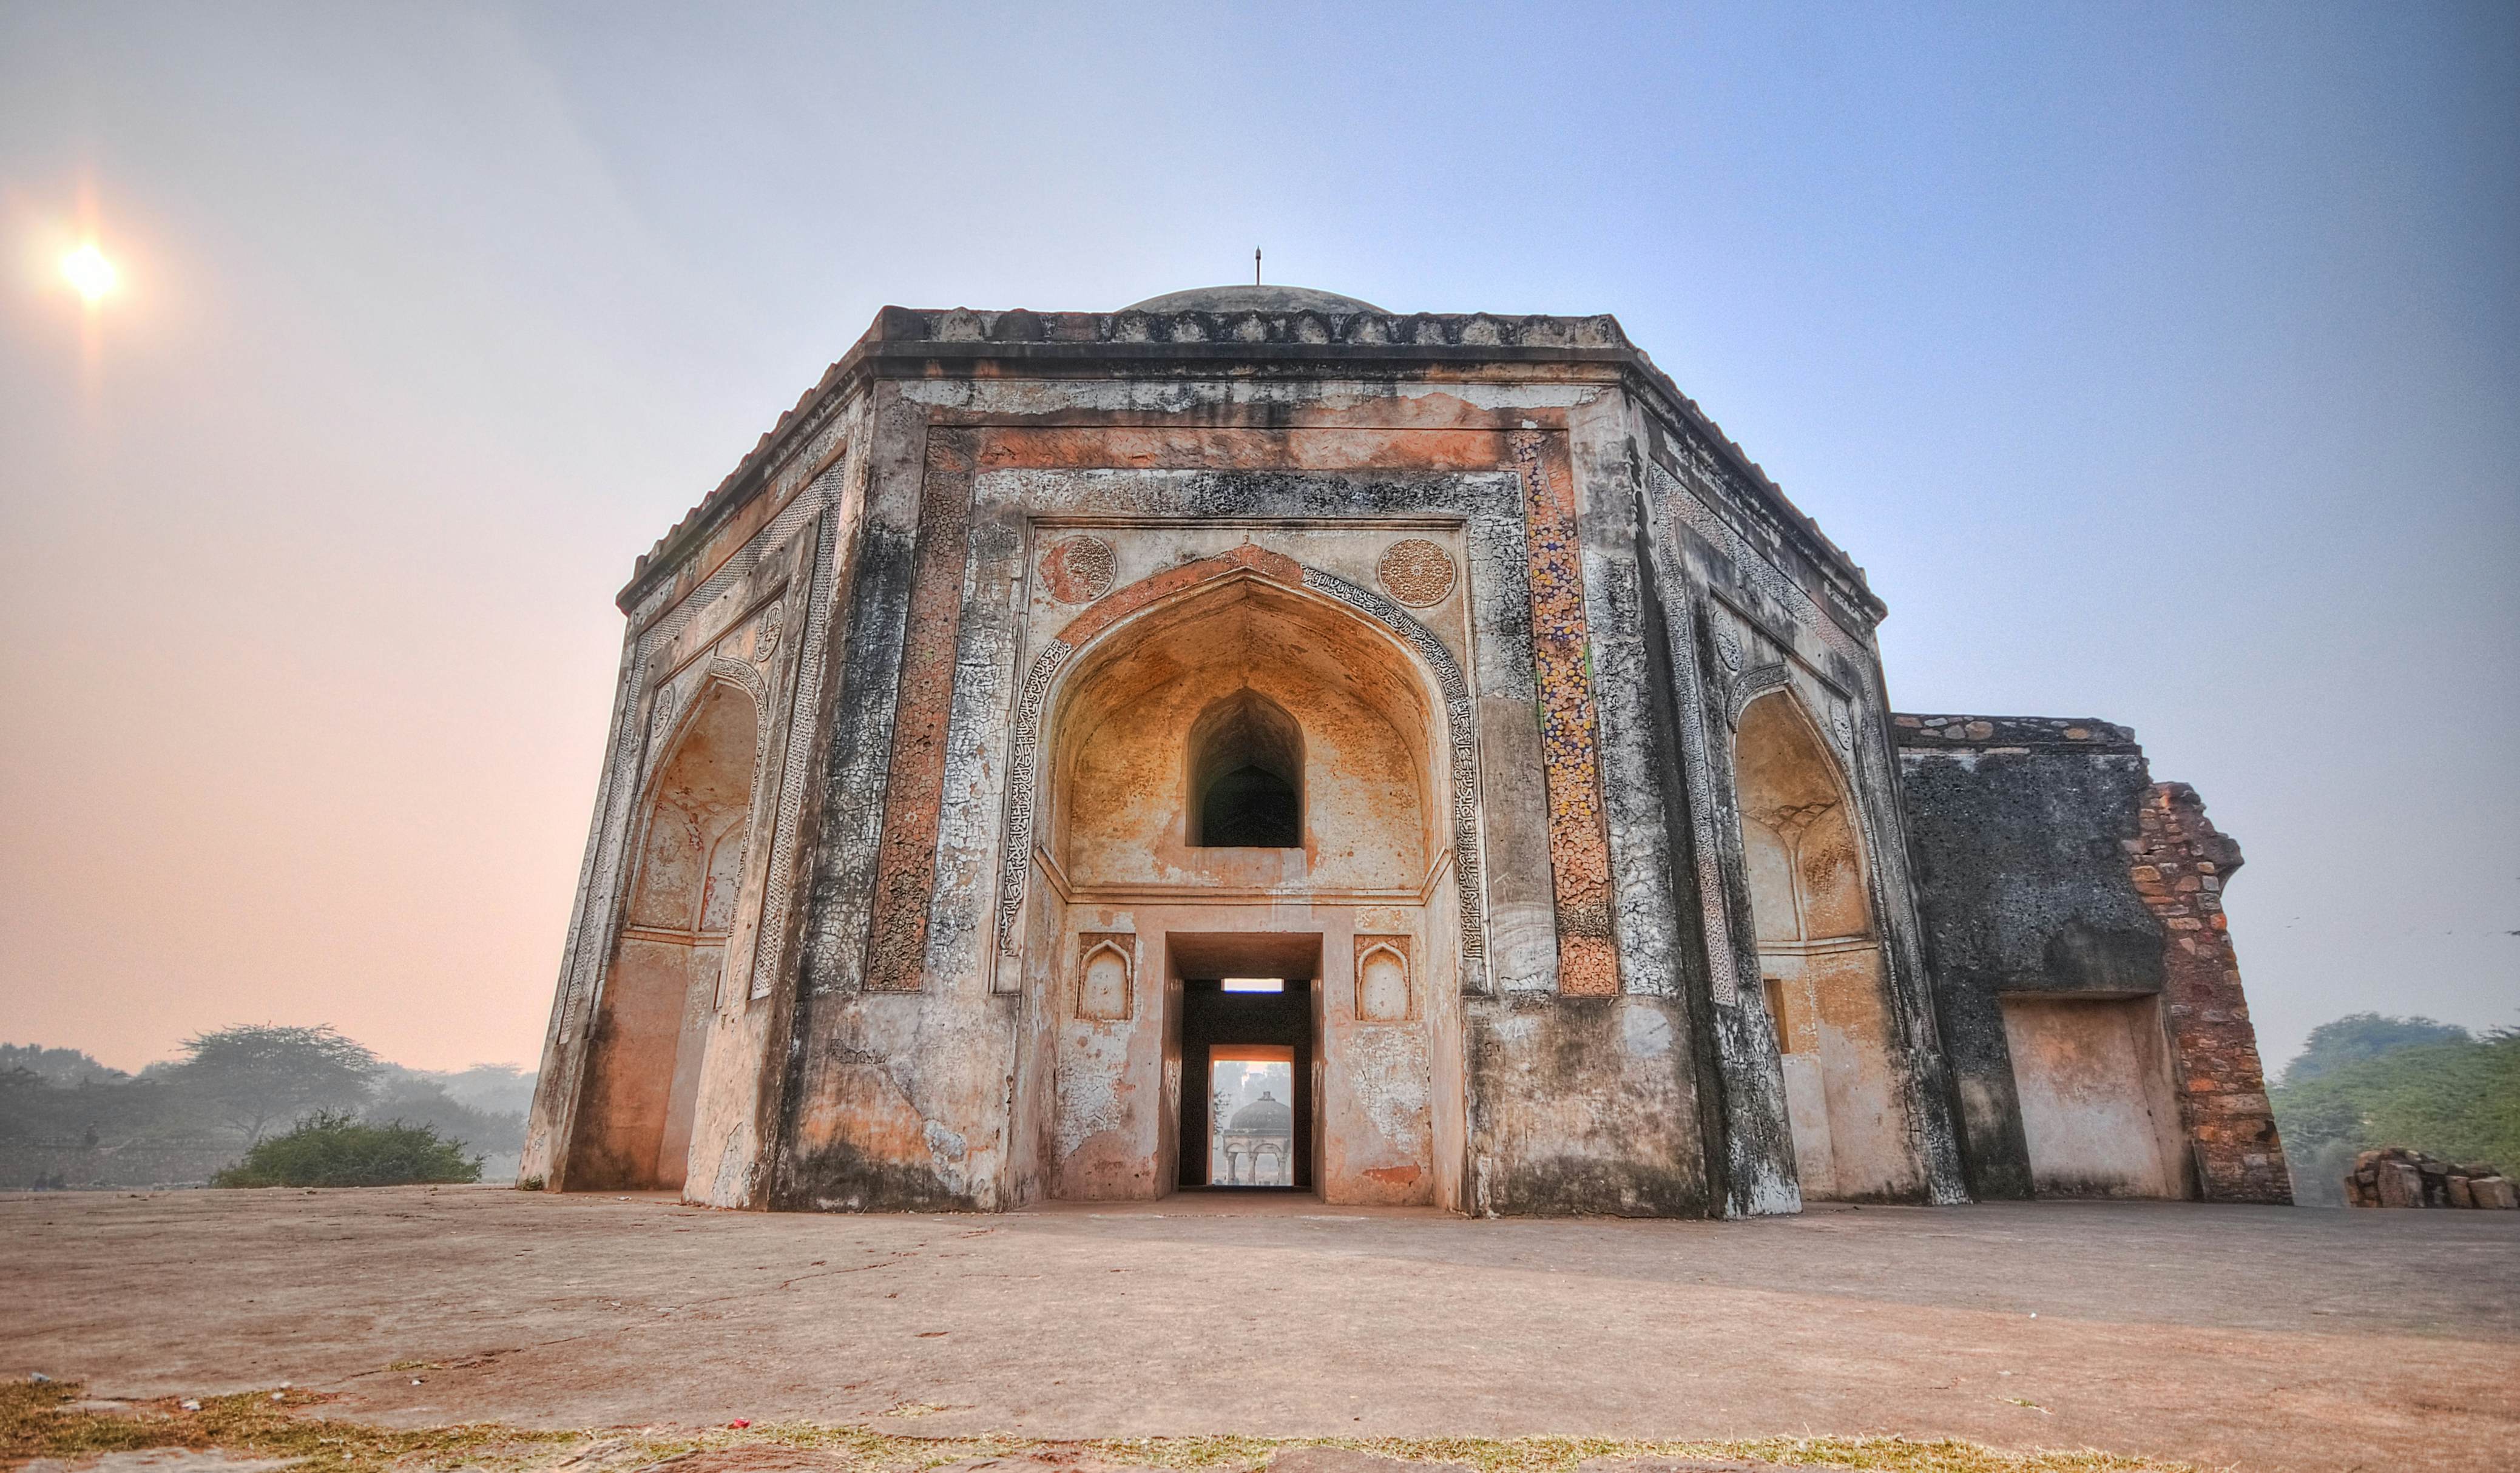 Mehrauli Archaeological Park | Delhi, India Attractions - Lonely Planet